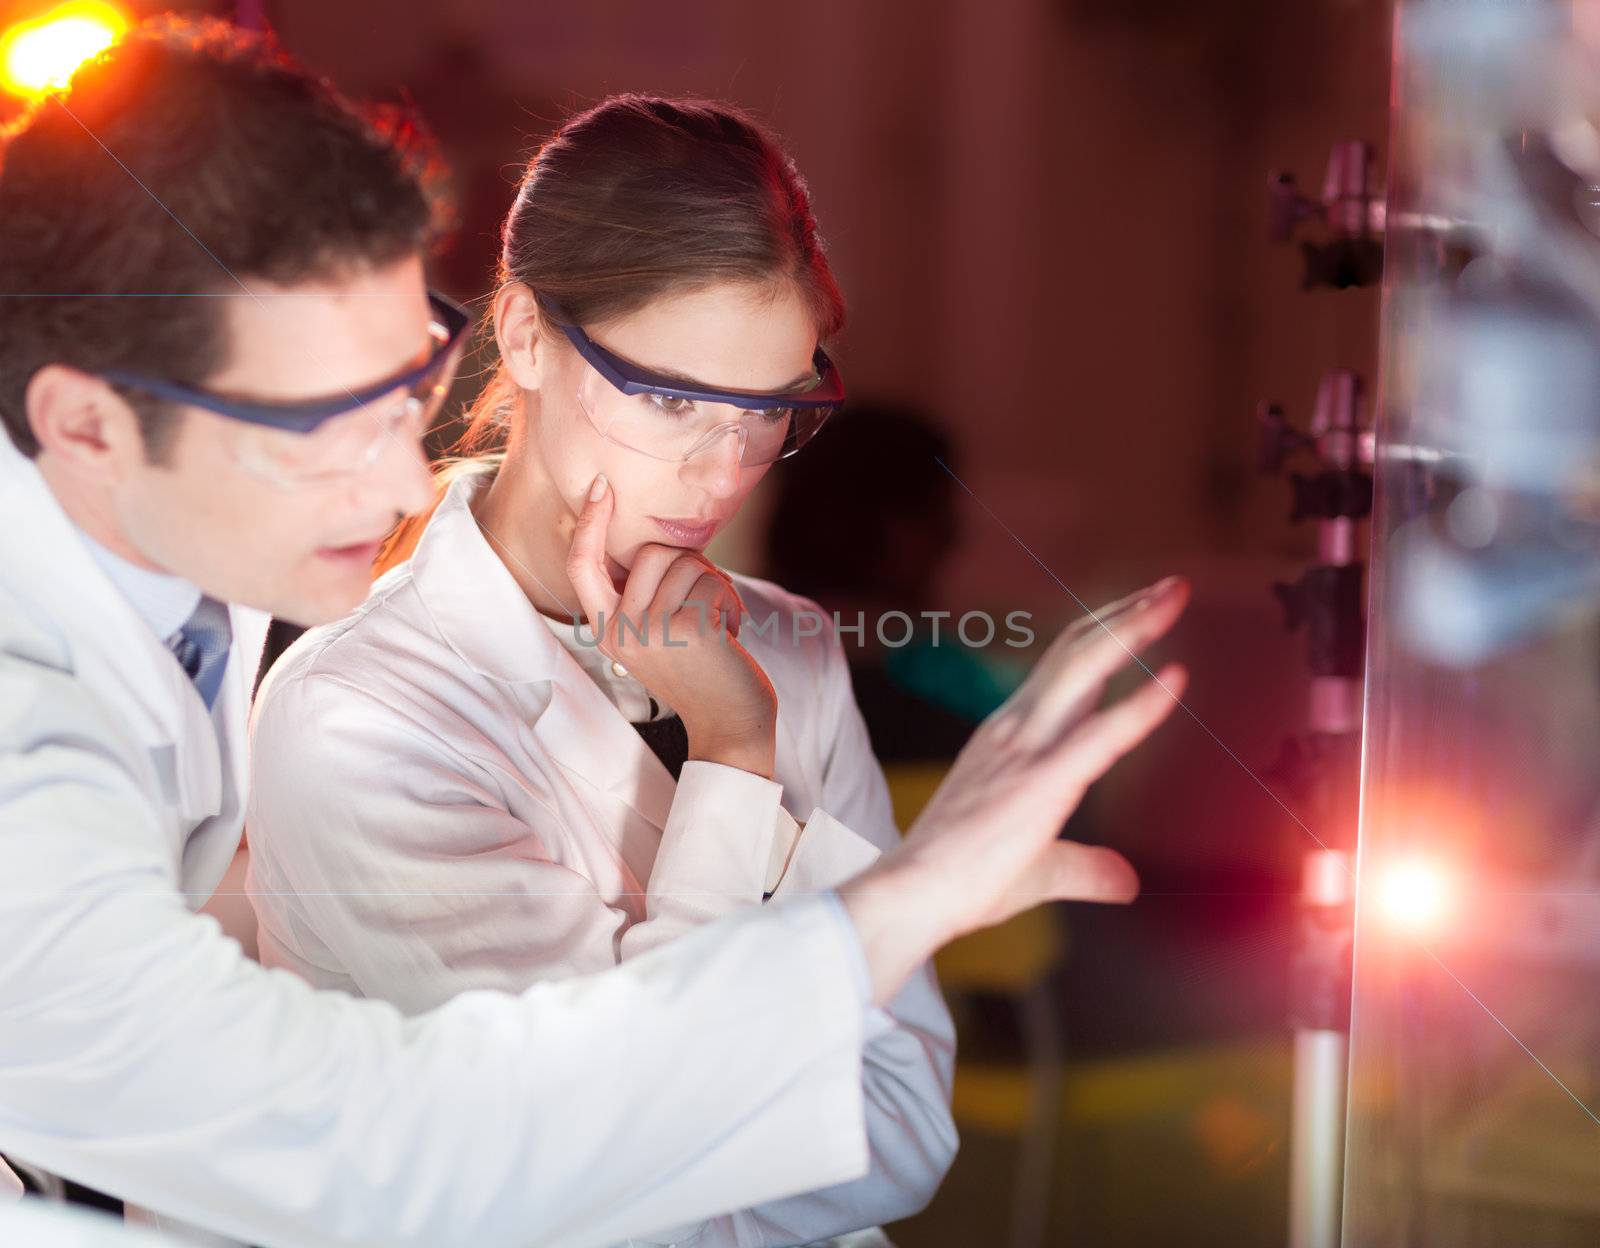 Portrait of a focused electrical engineering researchers in their working environment checking the phenomenon of breaking laser beam on the glass surface.